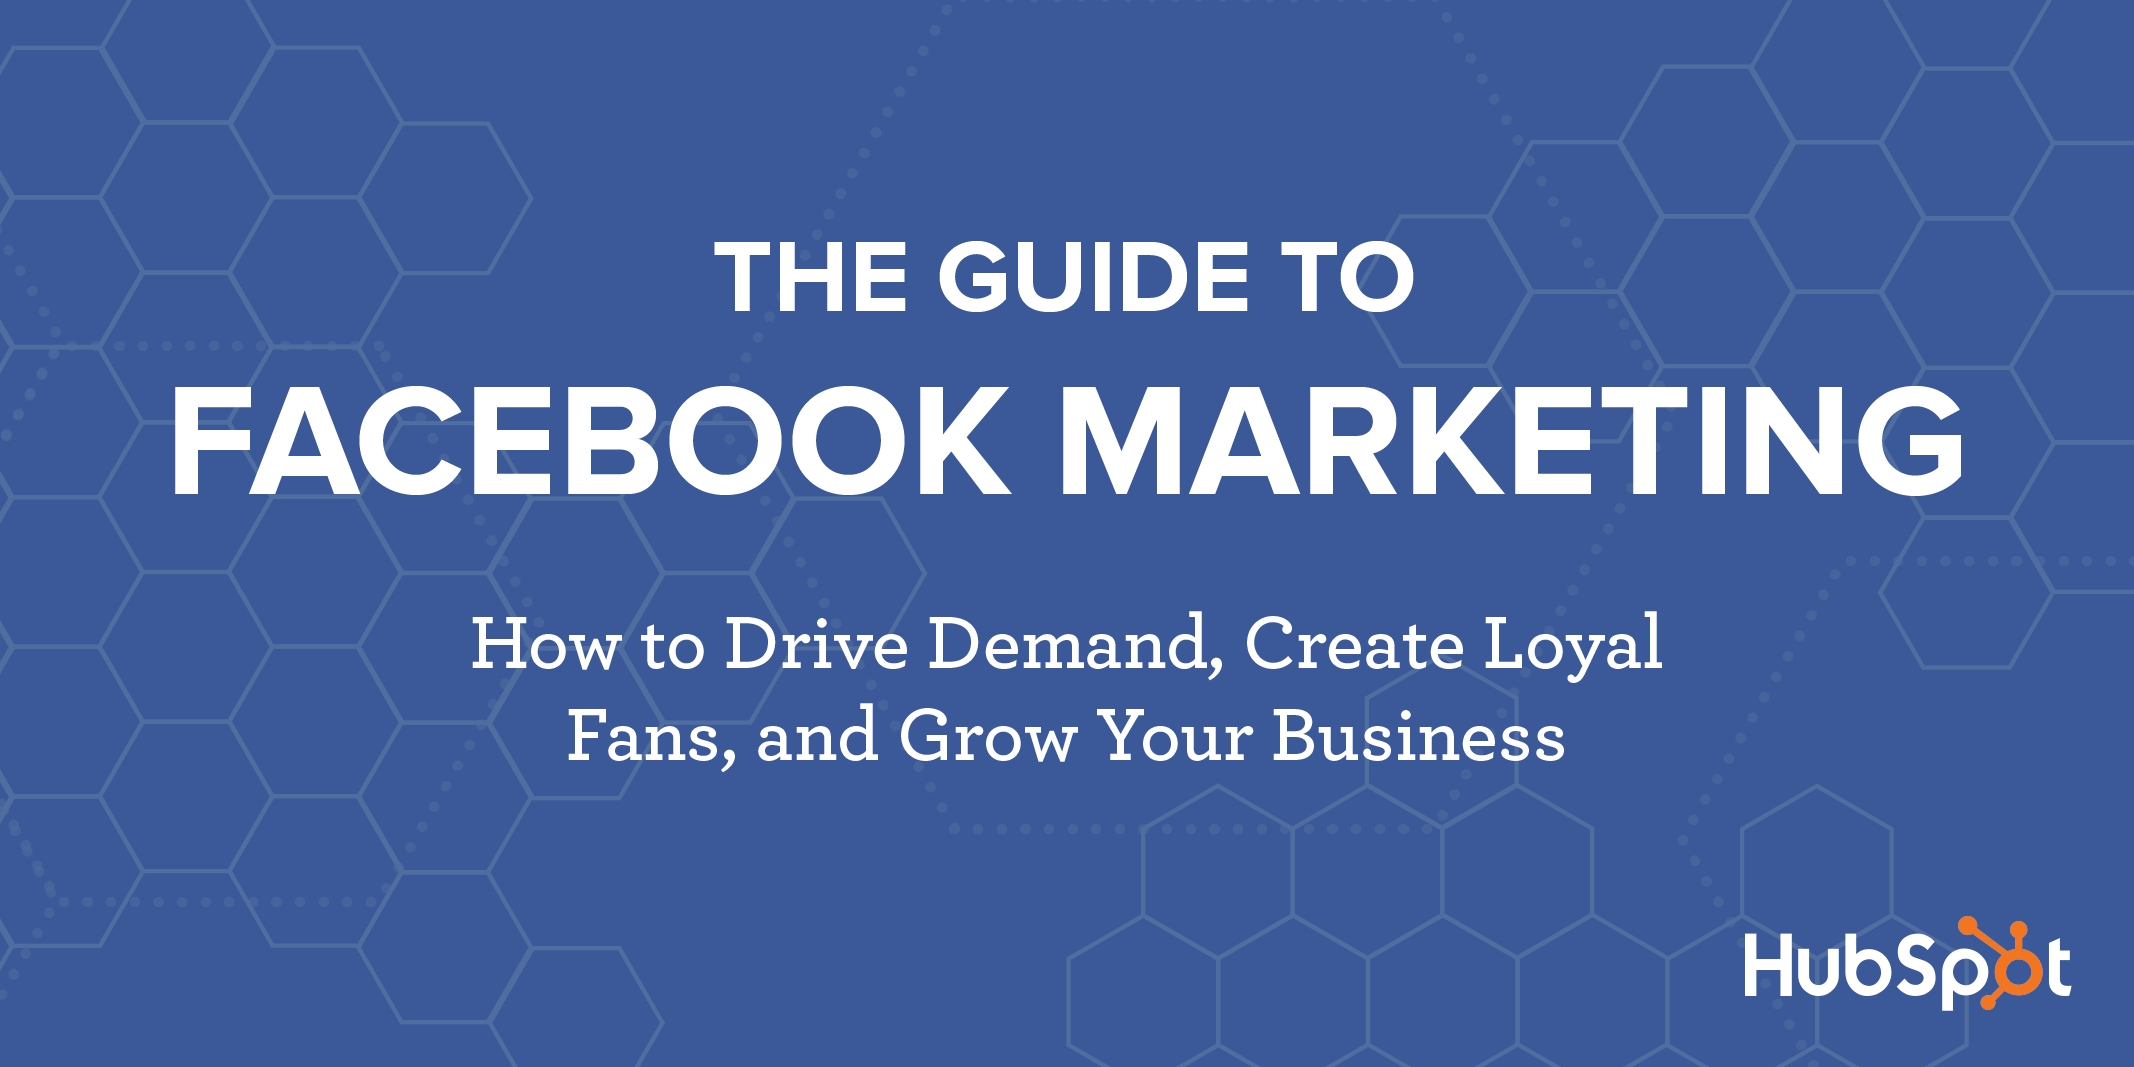 Facebook Marketing: The Ultimate Guide